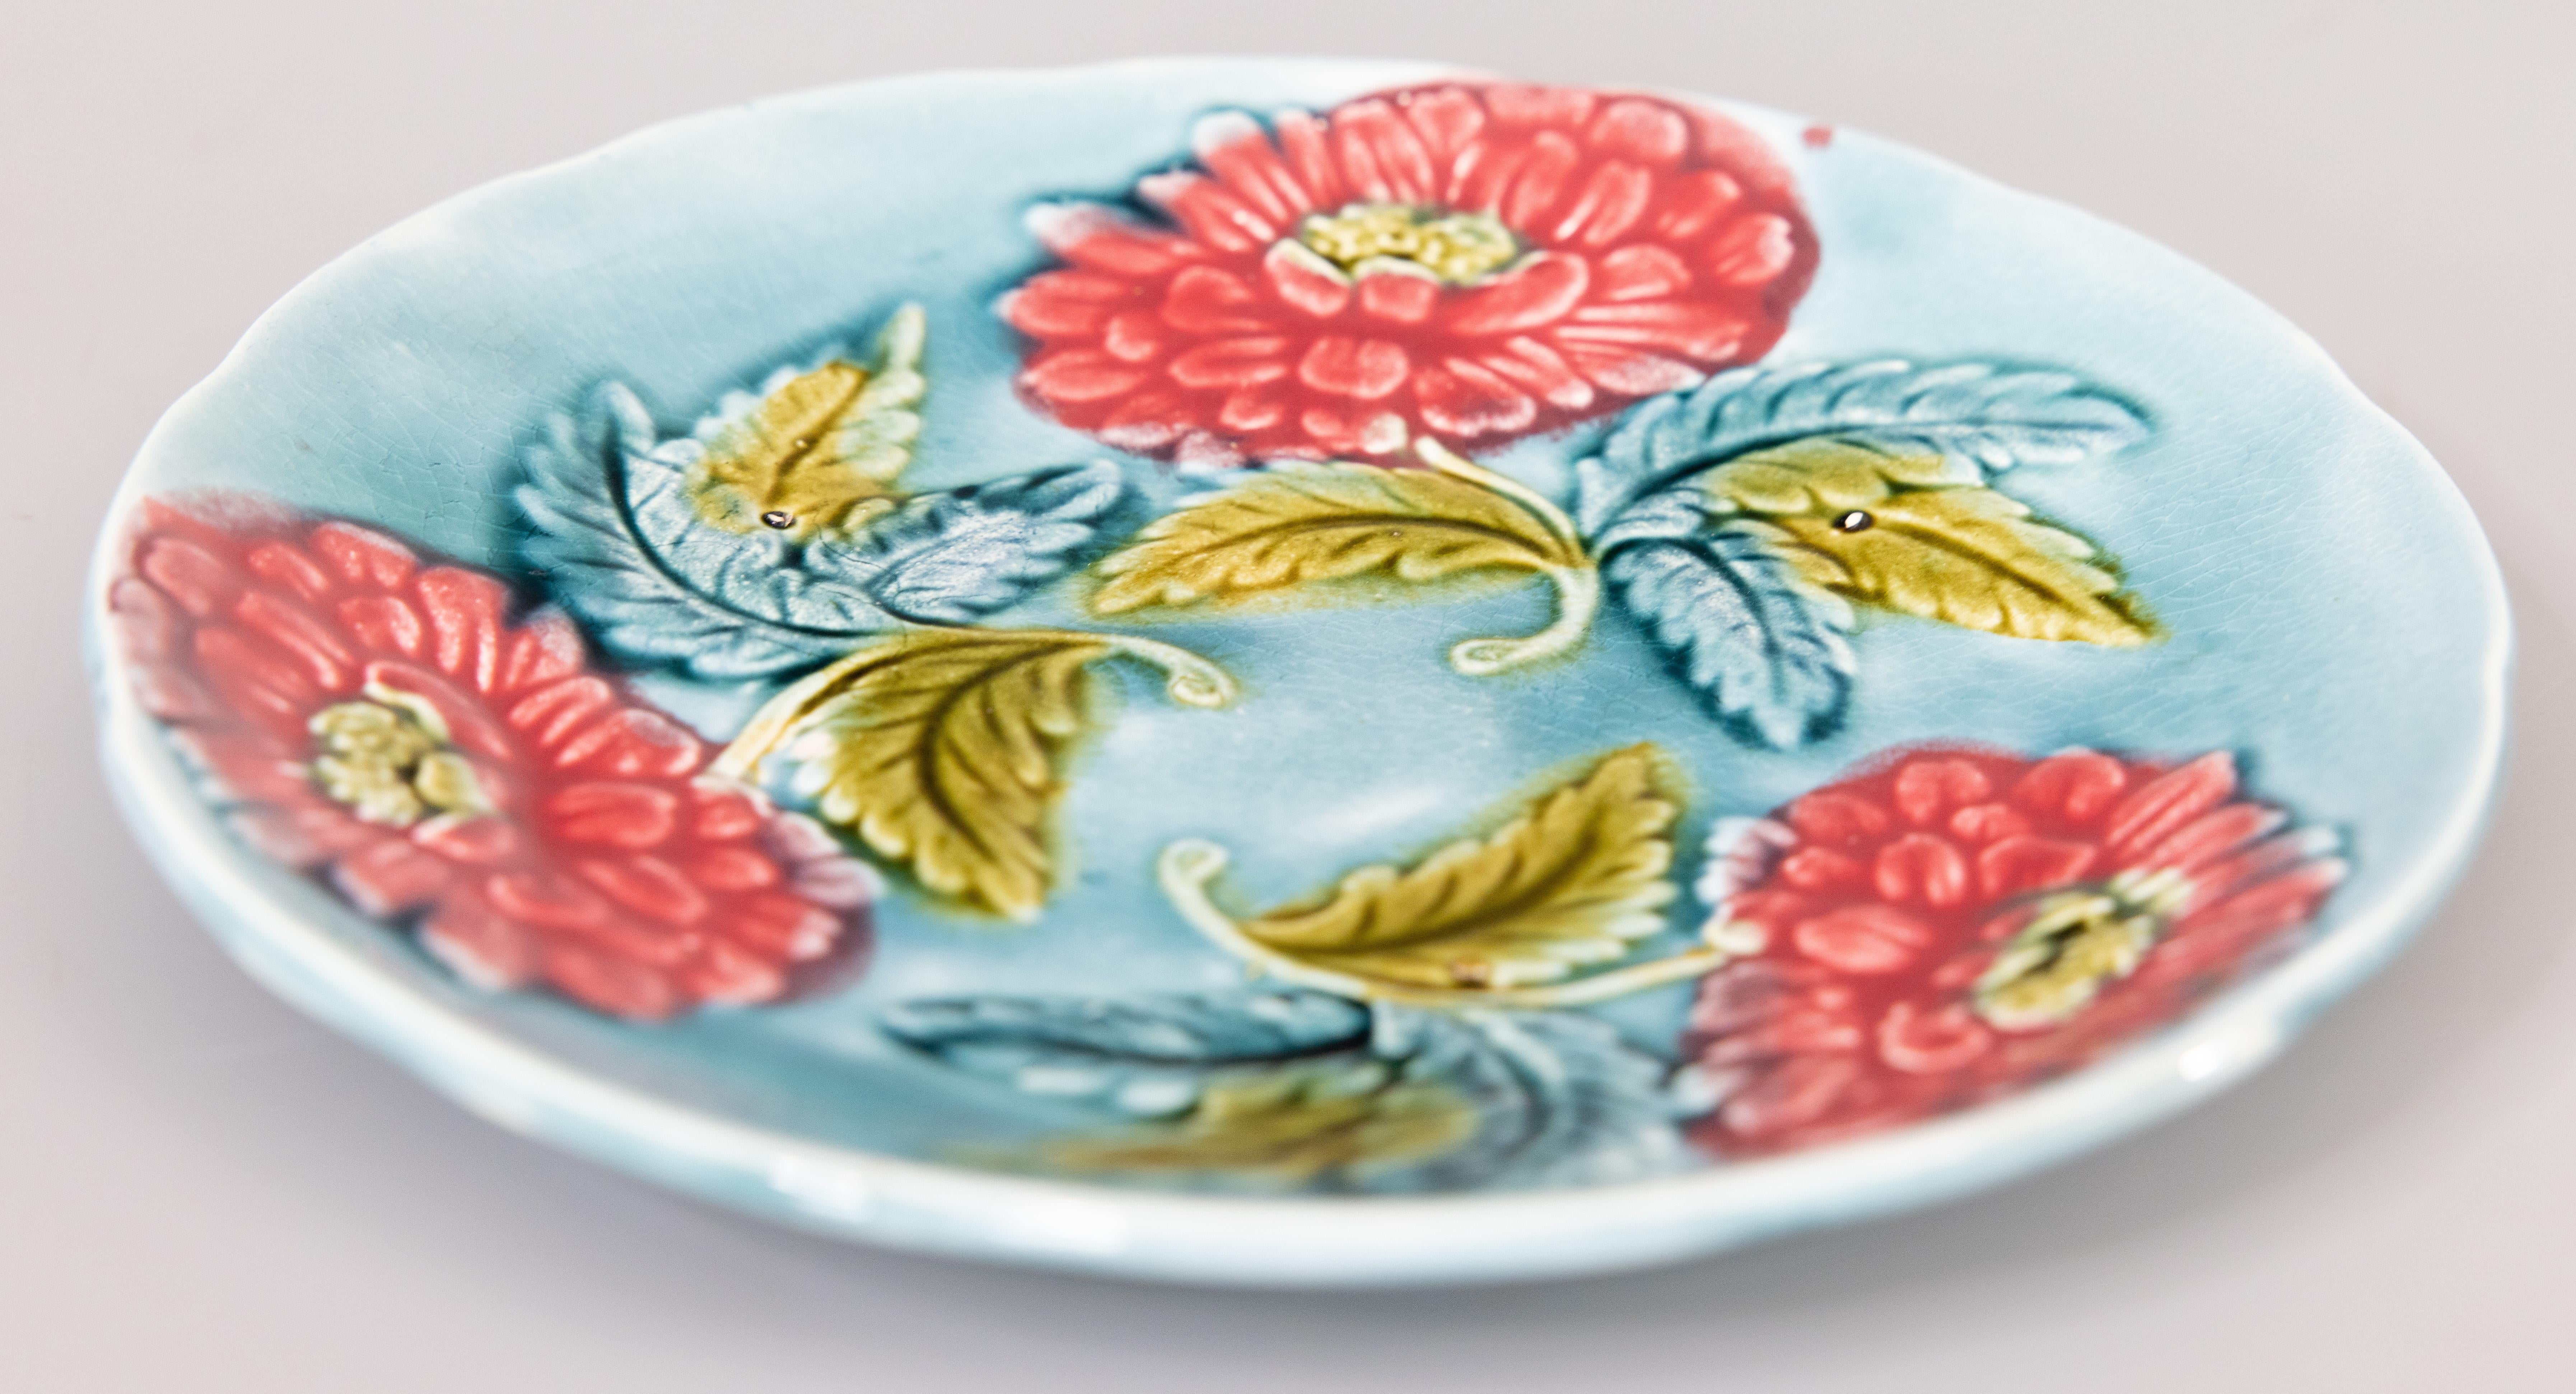 A lovely antique French majolica floral plate, circa 1890. This beautiful French country style plate has hand painted pink flowers and leaves on a light aqua blue background. It would be wonderful added to a collection or displayed on a wall or